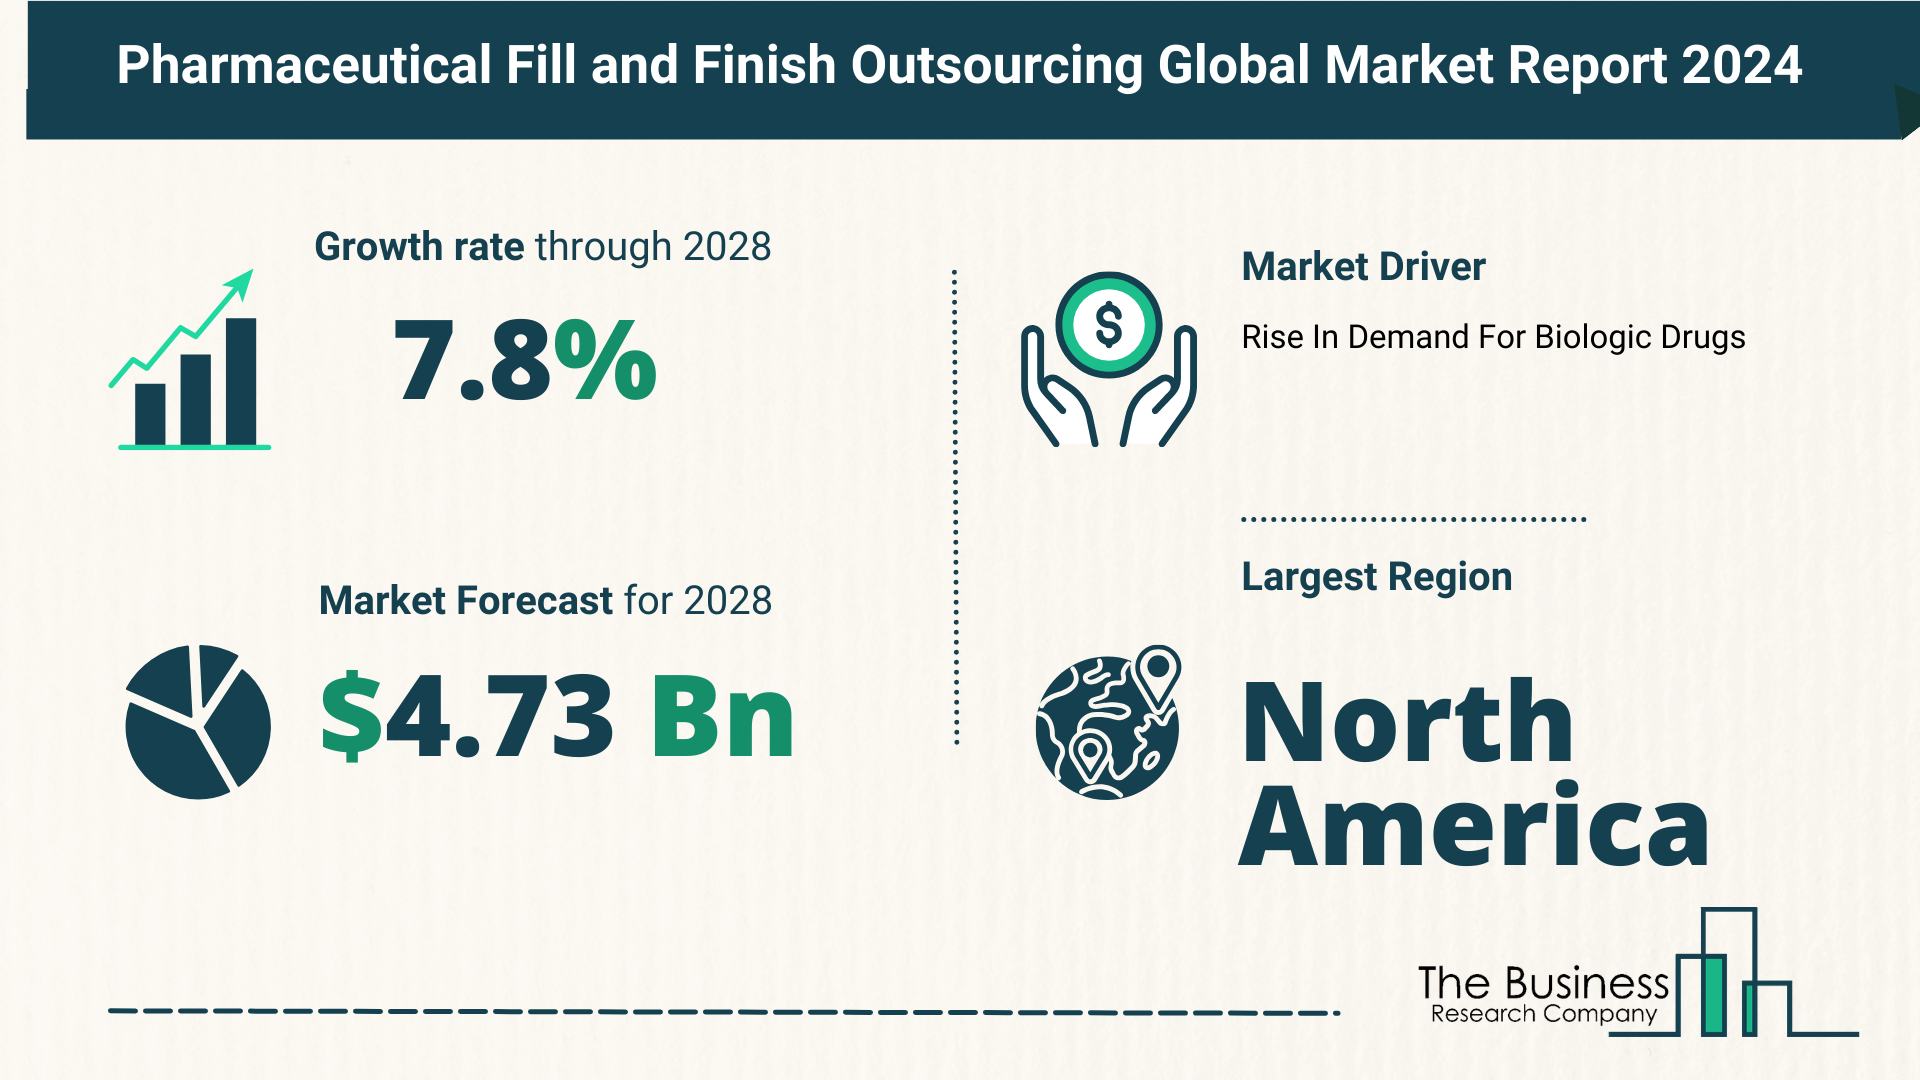 Global Pharmaceutical Fill and Finish Outsourcing Market